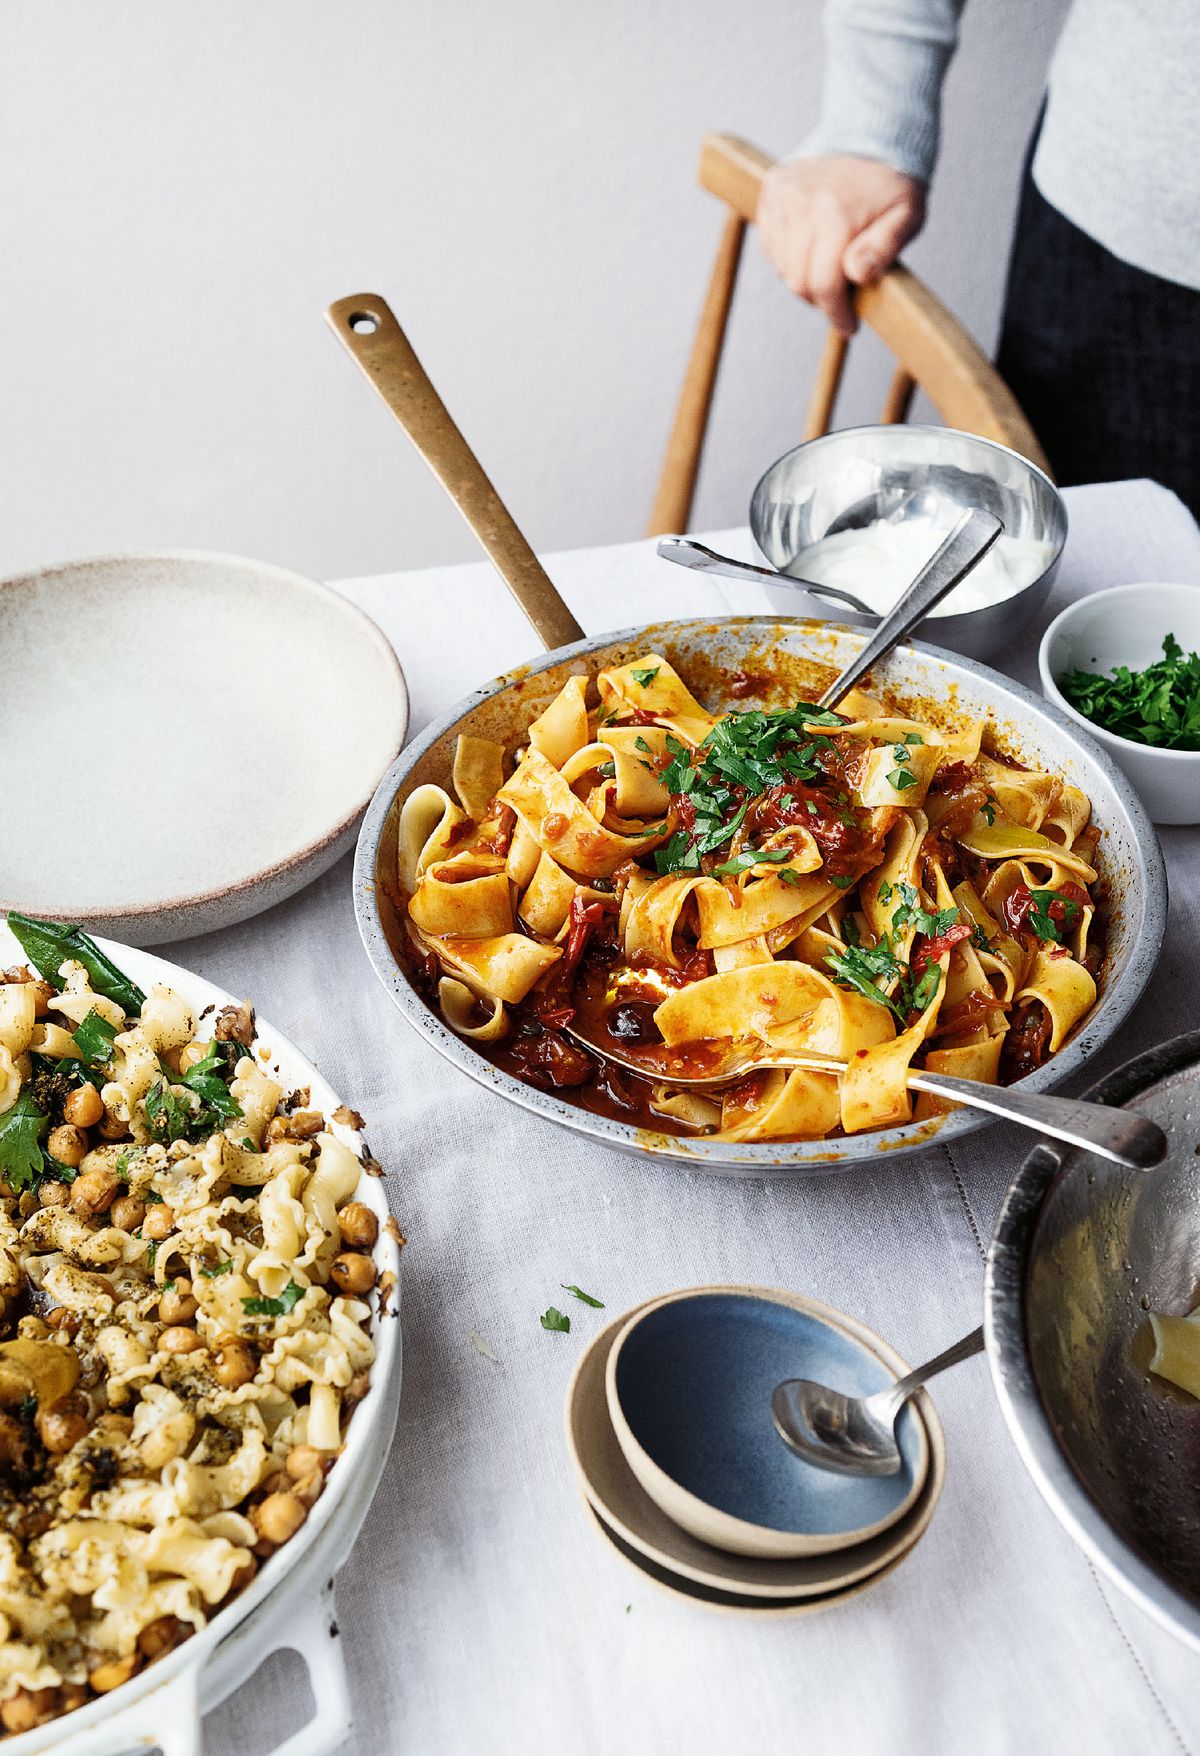 Yotam Ottolenghi’s Pappardelle with Rose Harissa, Black Olives and Capers